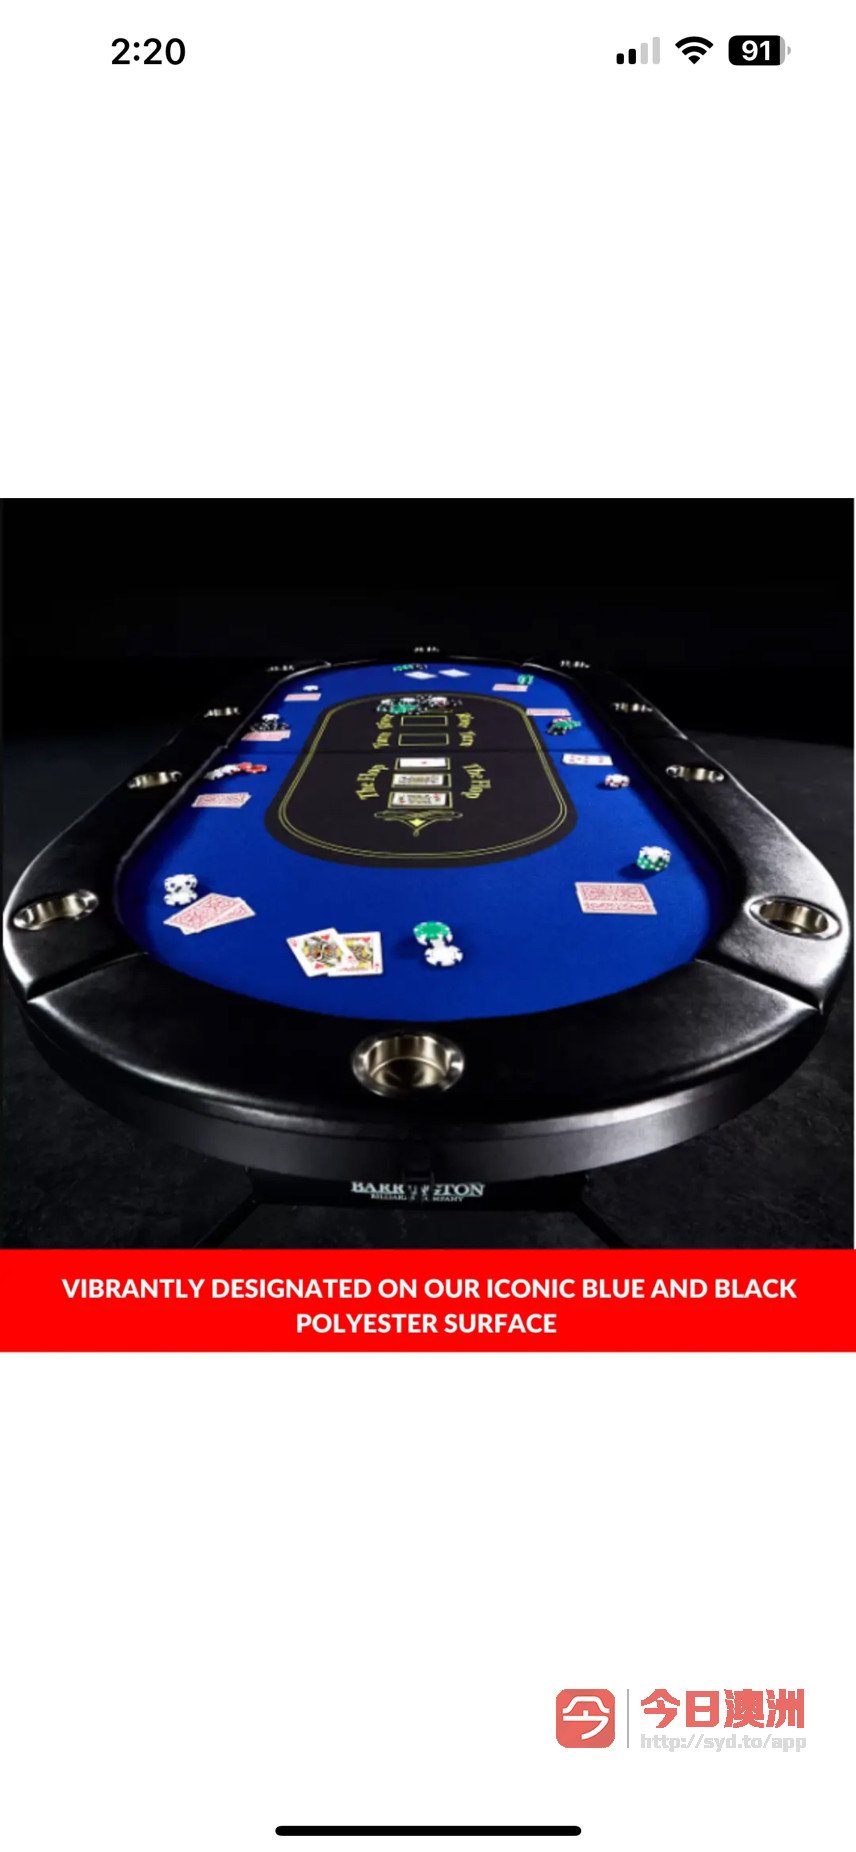 89player poker table